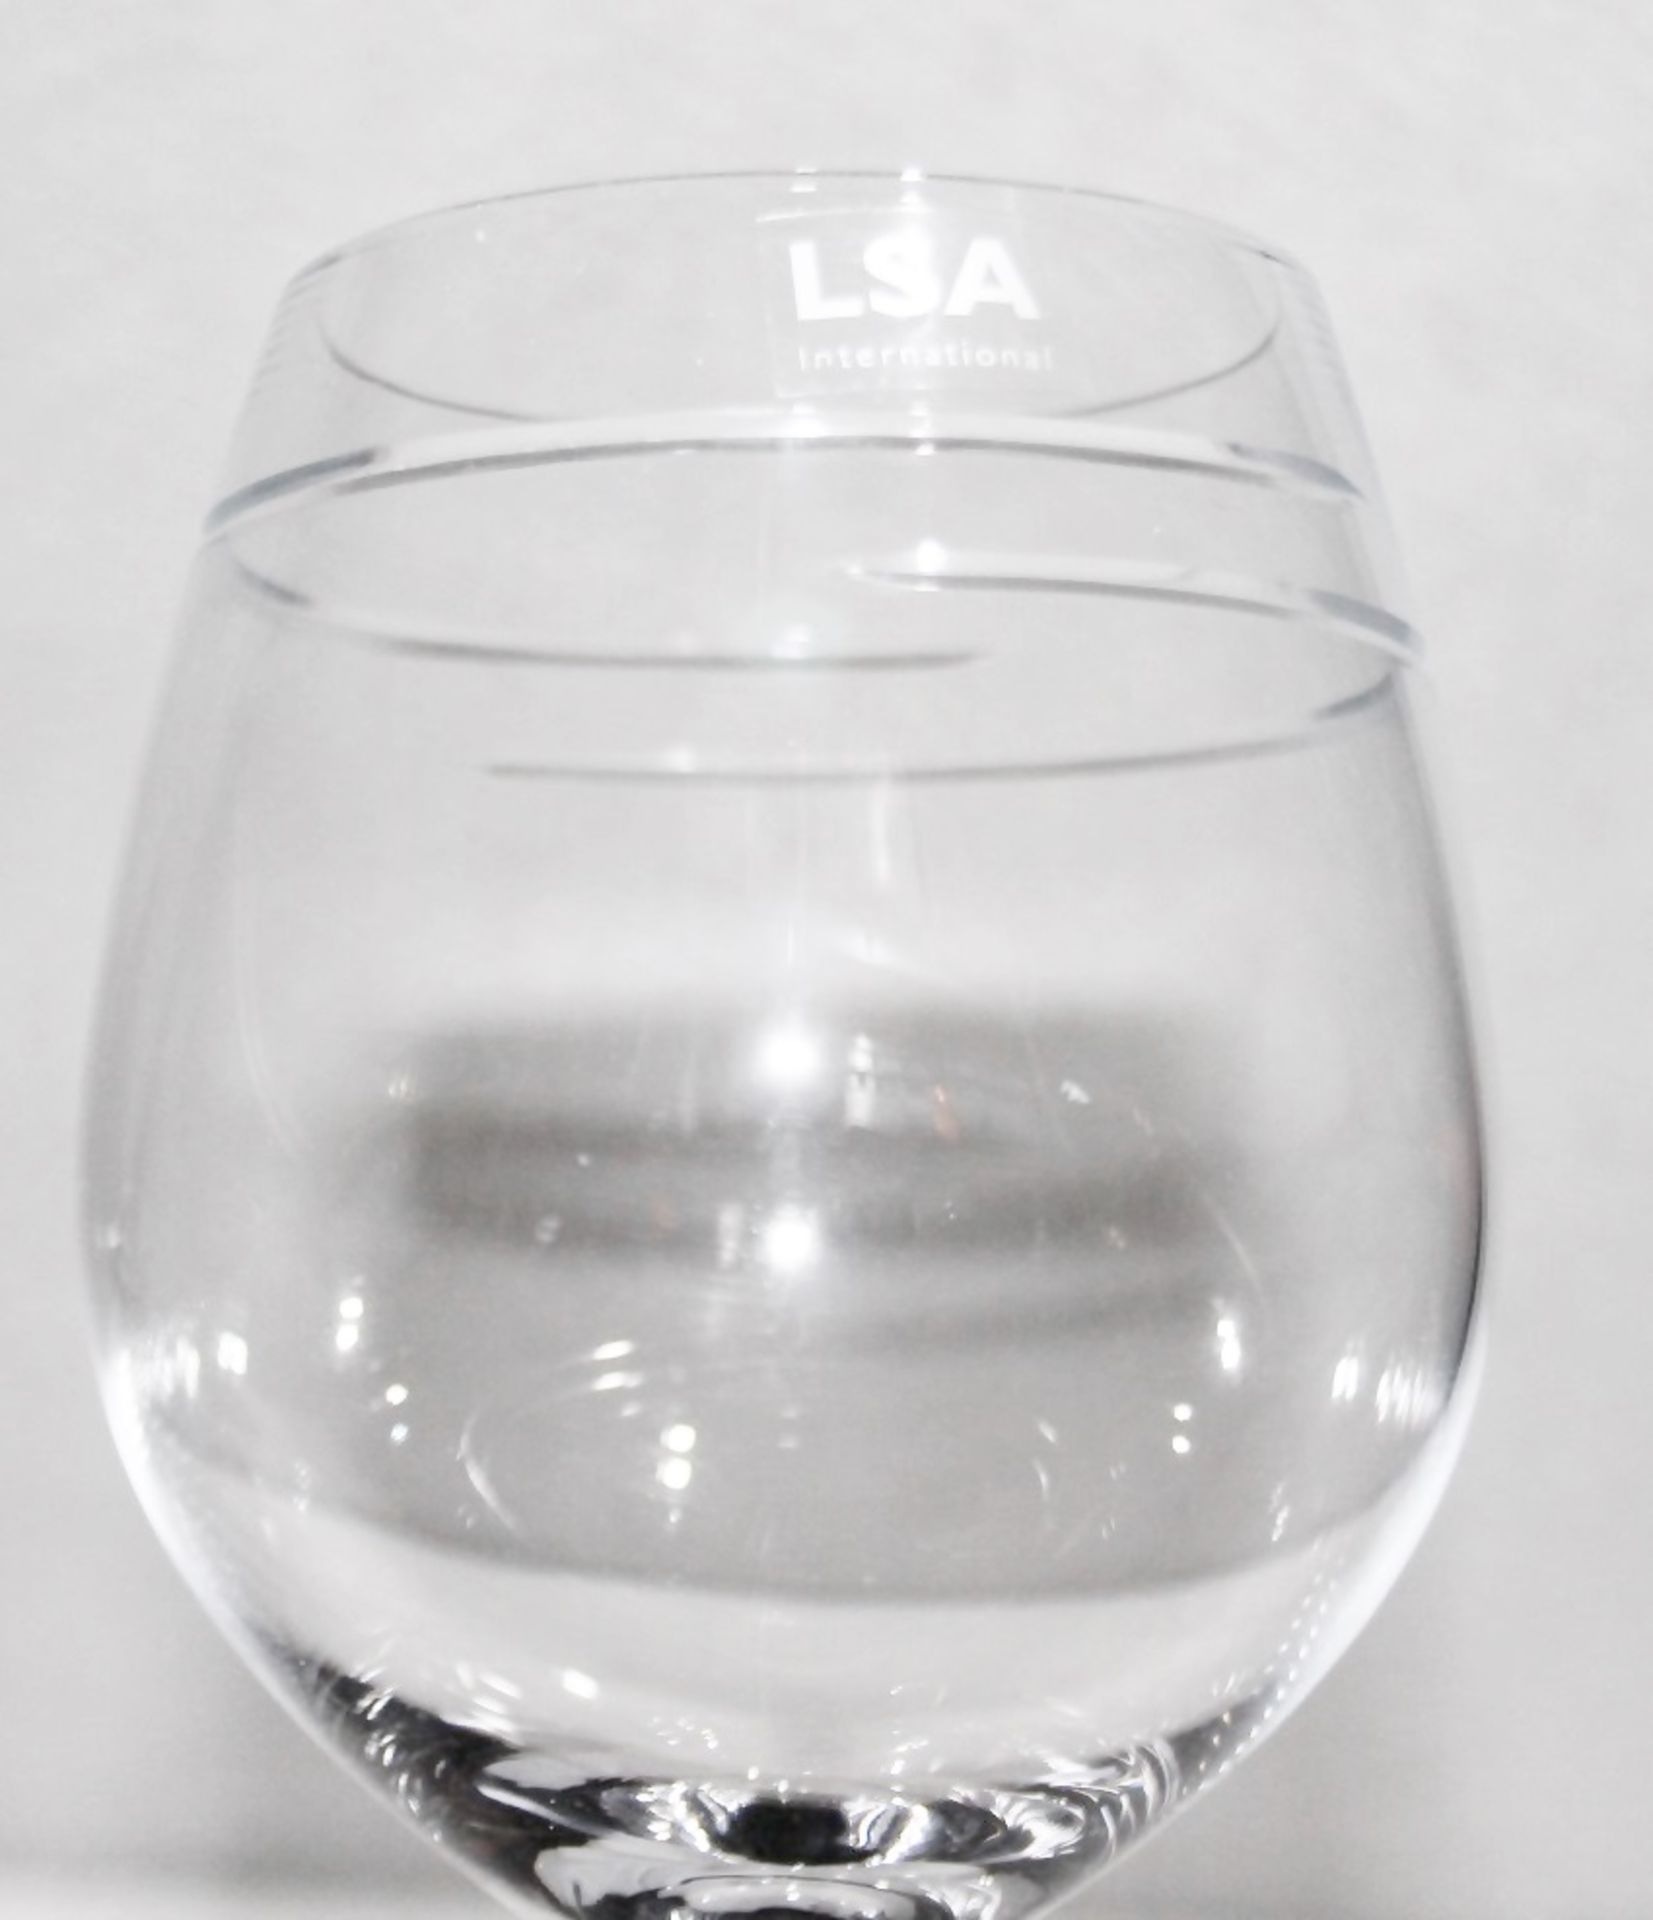 1 x LSA INTERNATIONAL 'Verso' Designer Mouthblown Red Wine Glass (750ml) - Unused Boxed Stock - Image 4 of 5